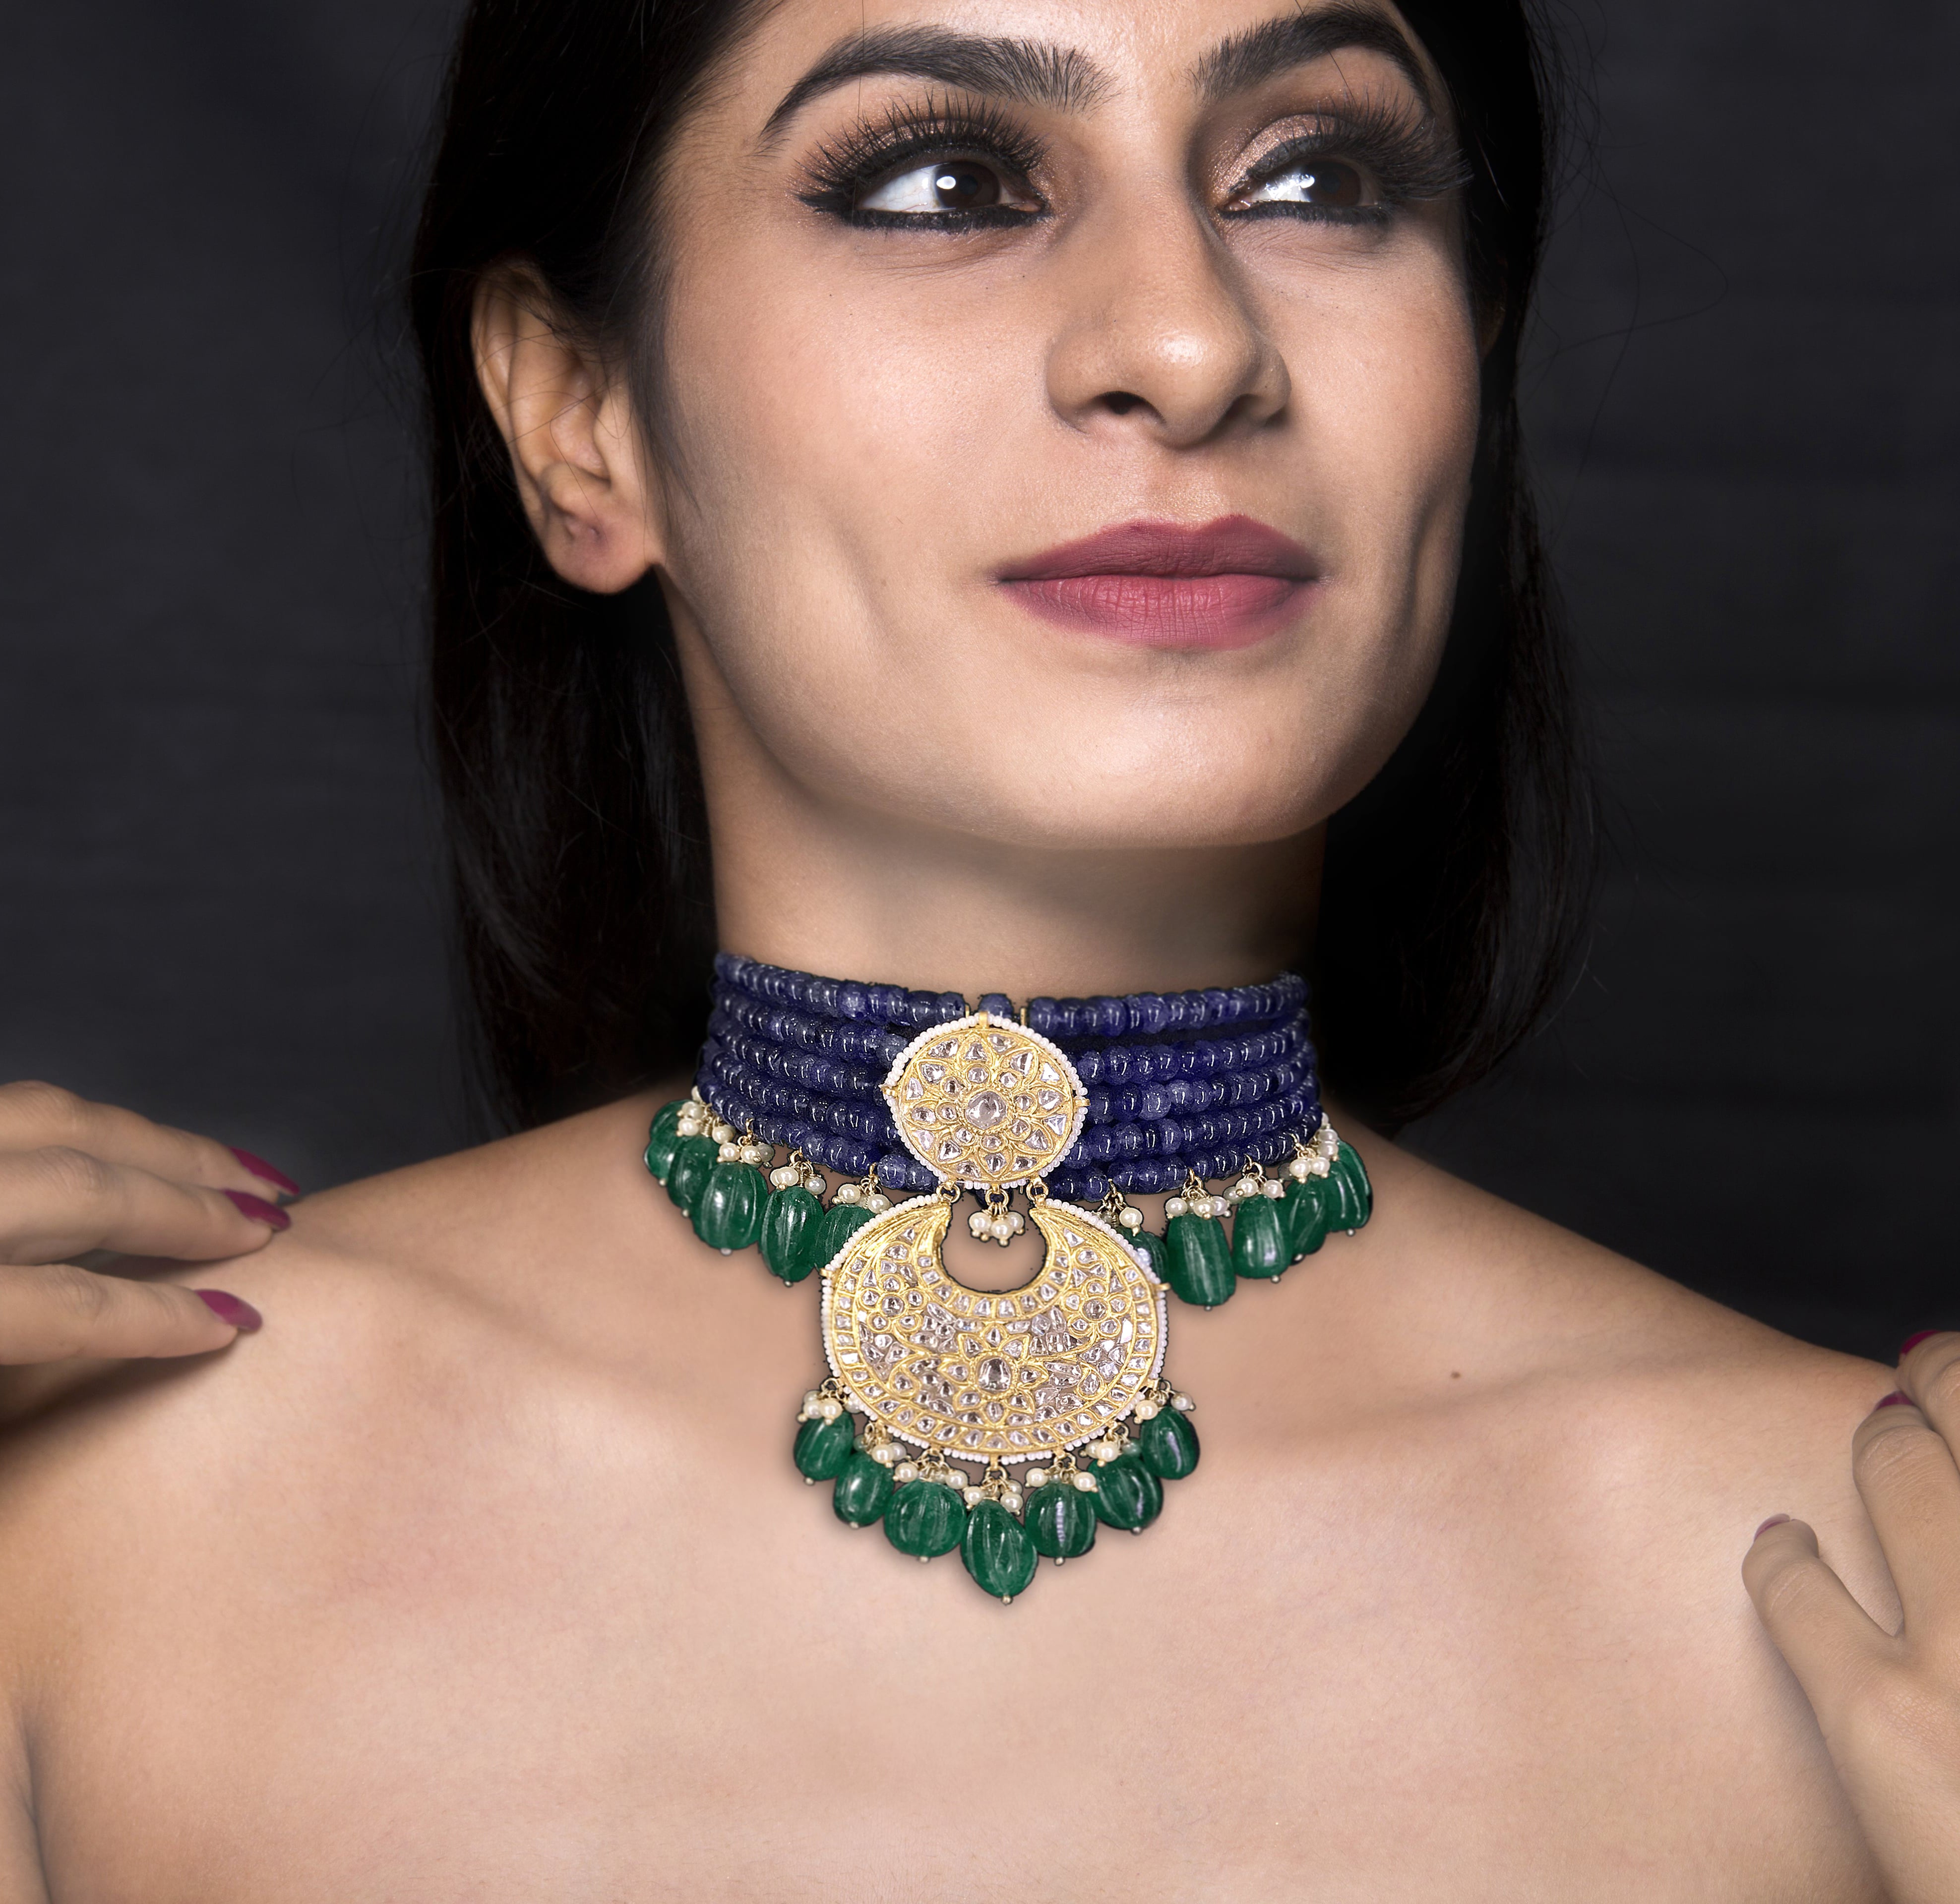 23k Gold and Diamond Polki Choker Necklace with Blue Sapphires and Carved Green Beryl Melons